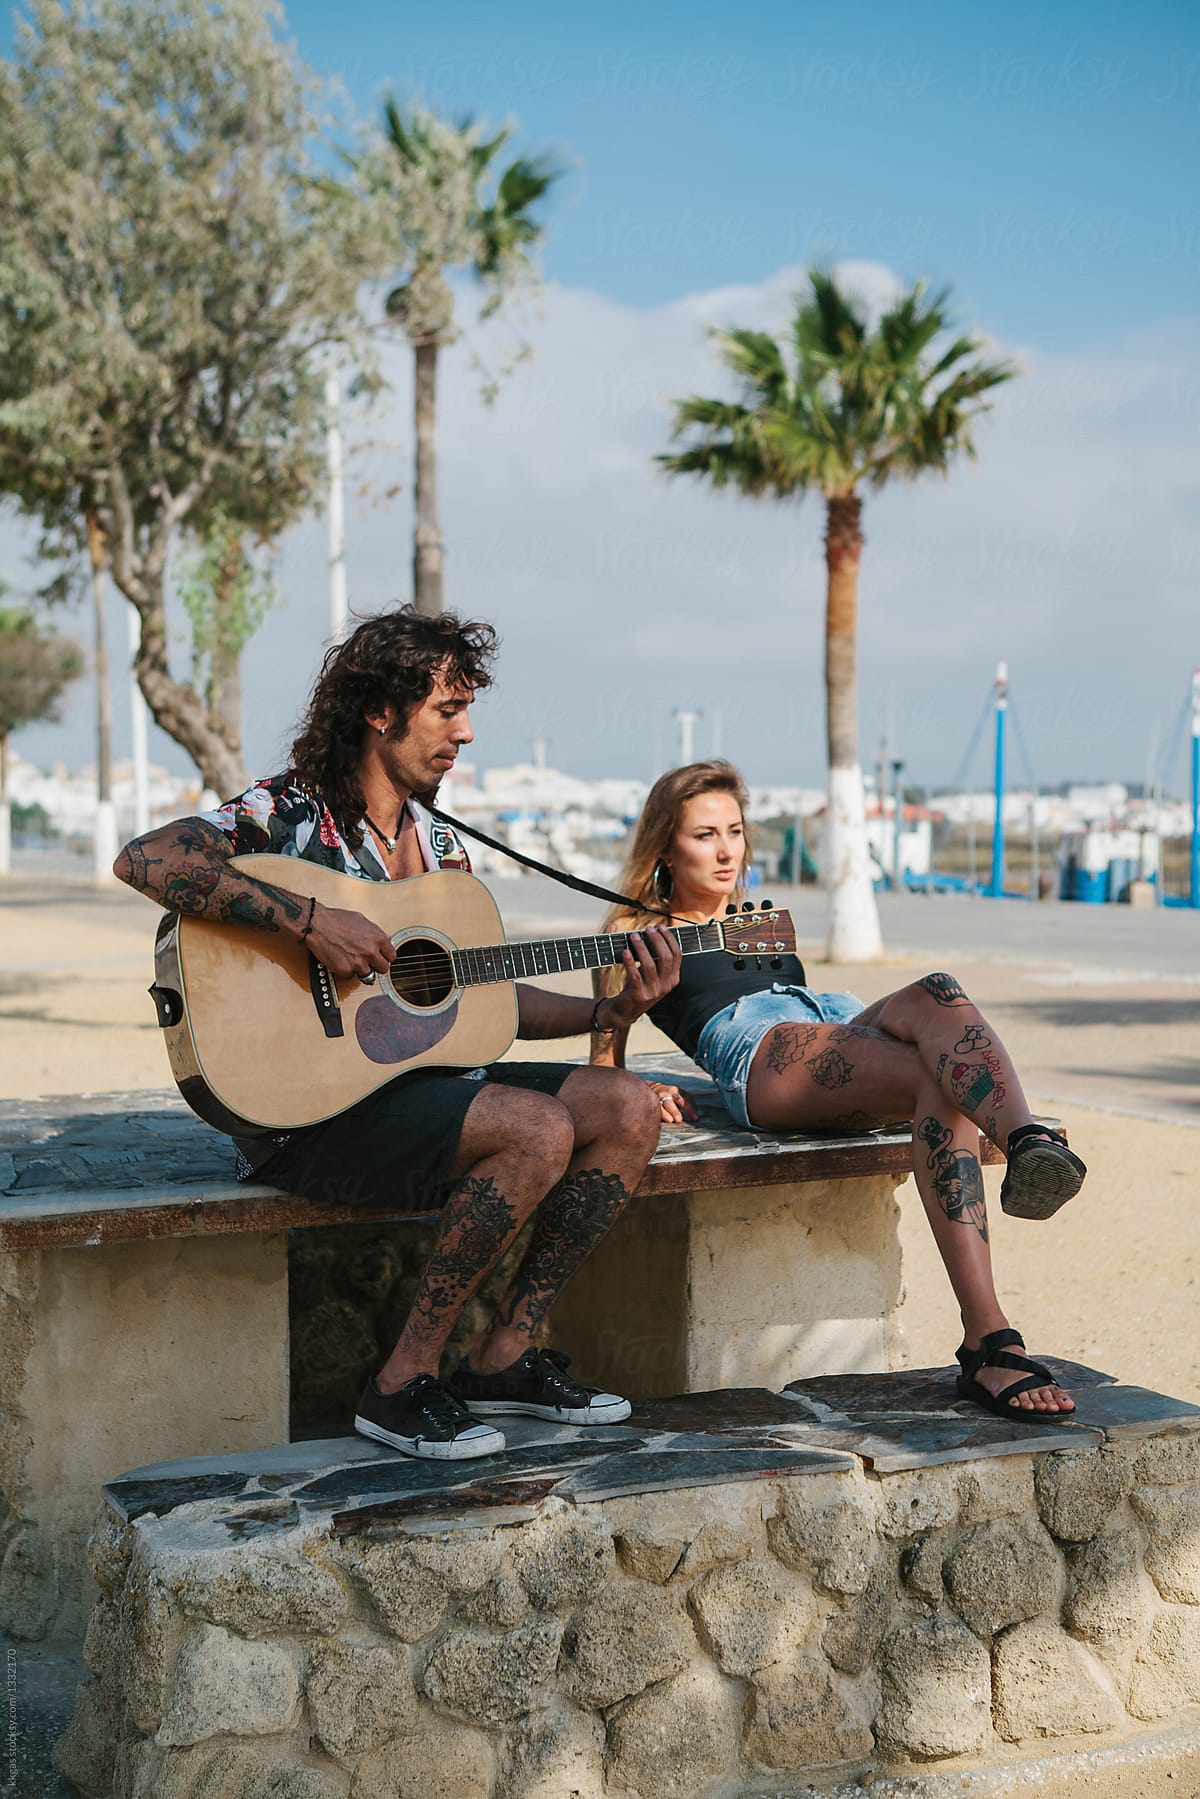 Cool tattooed man and woman